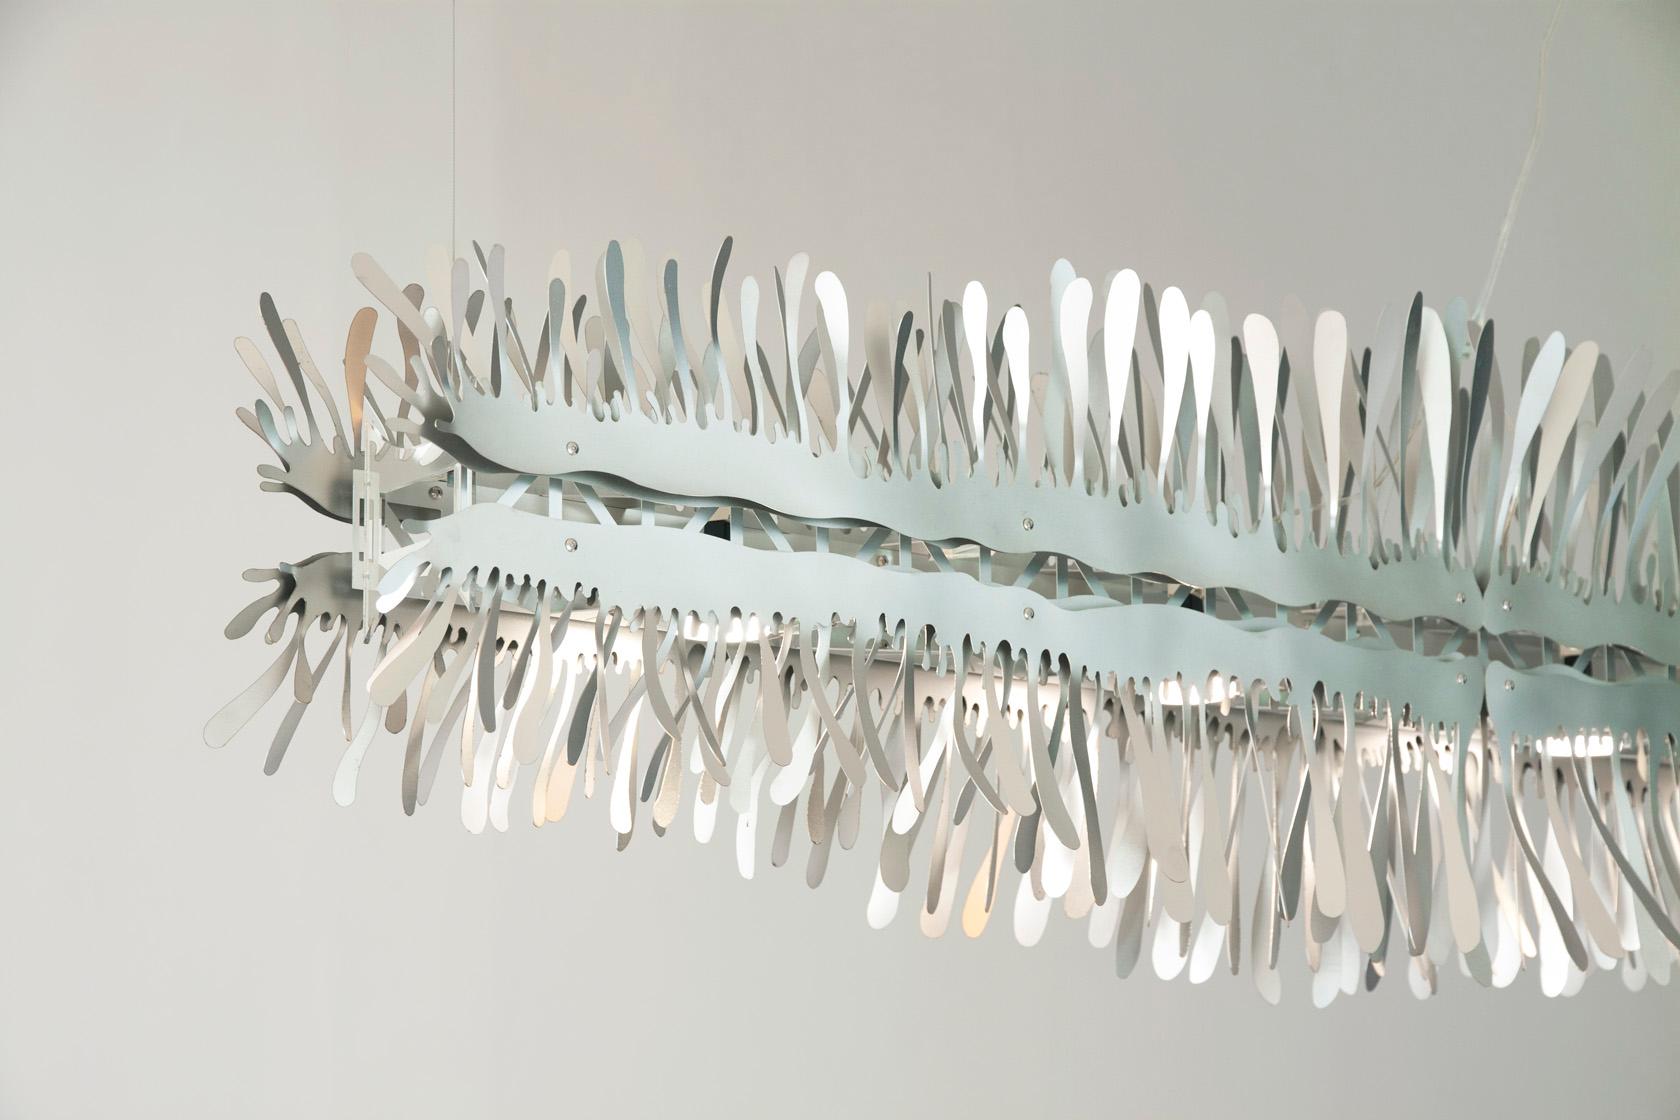 Liquid 48” Linear Chandelier in Stainless Steel by David D’Imperio For Sale 1